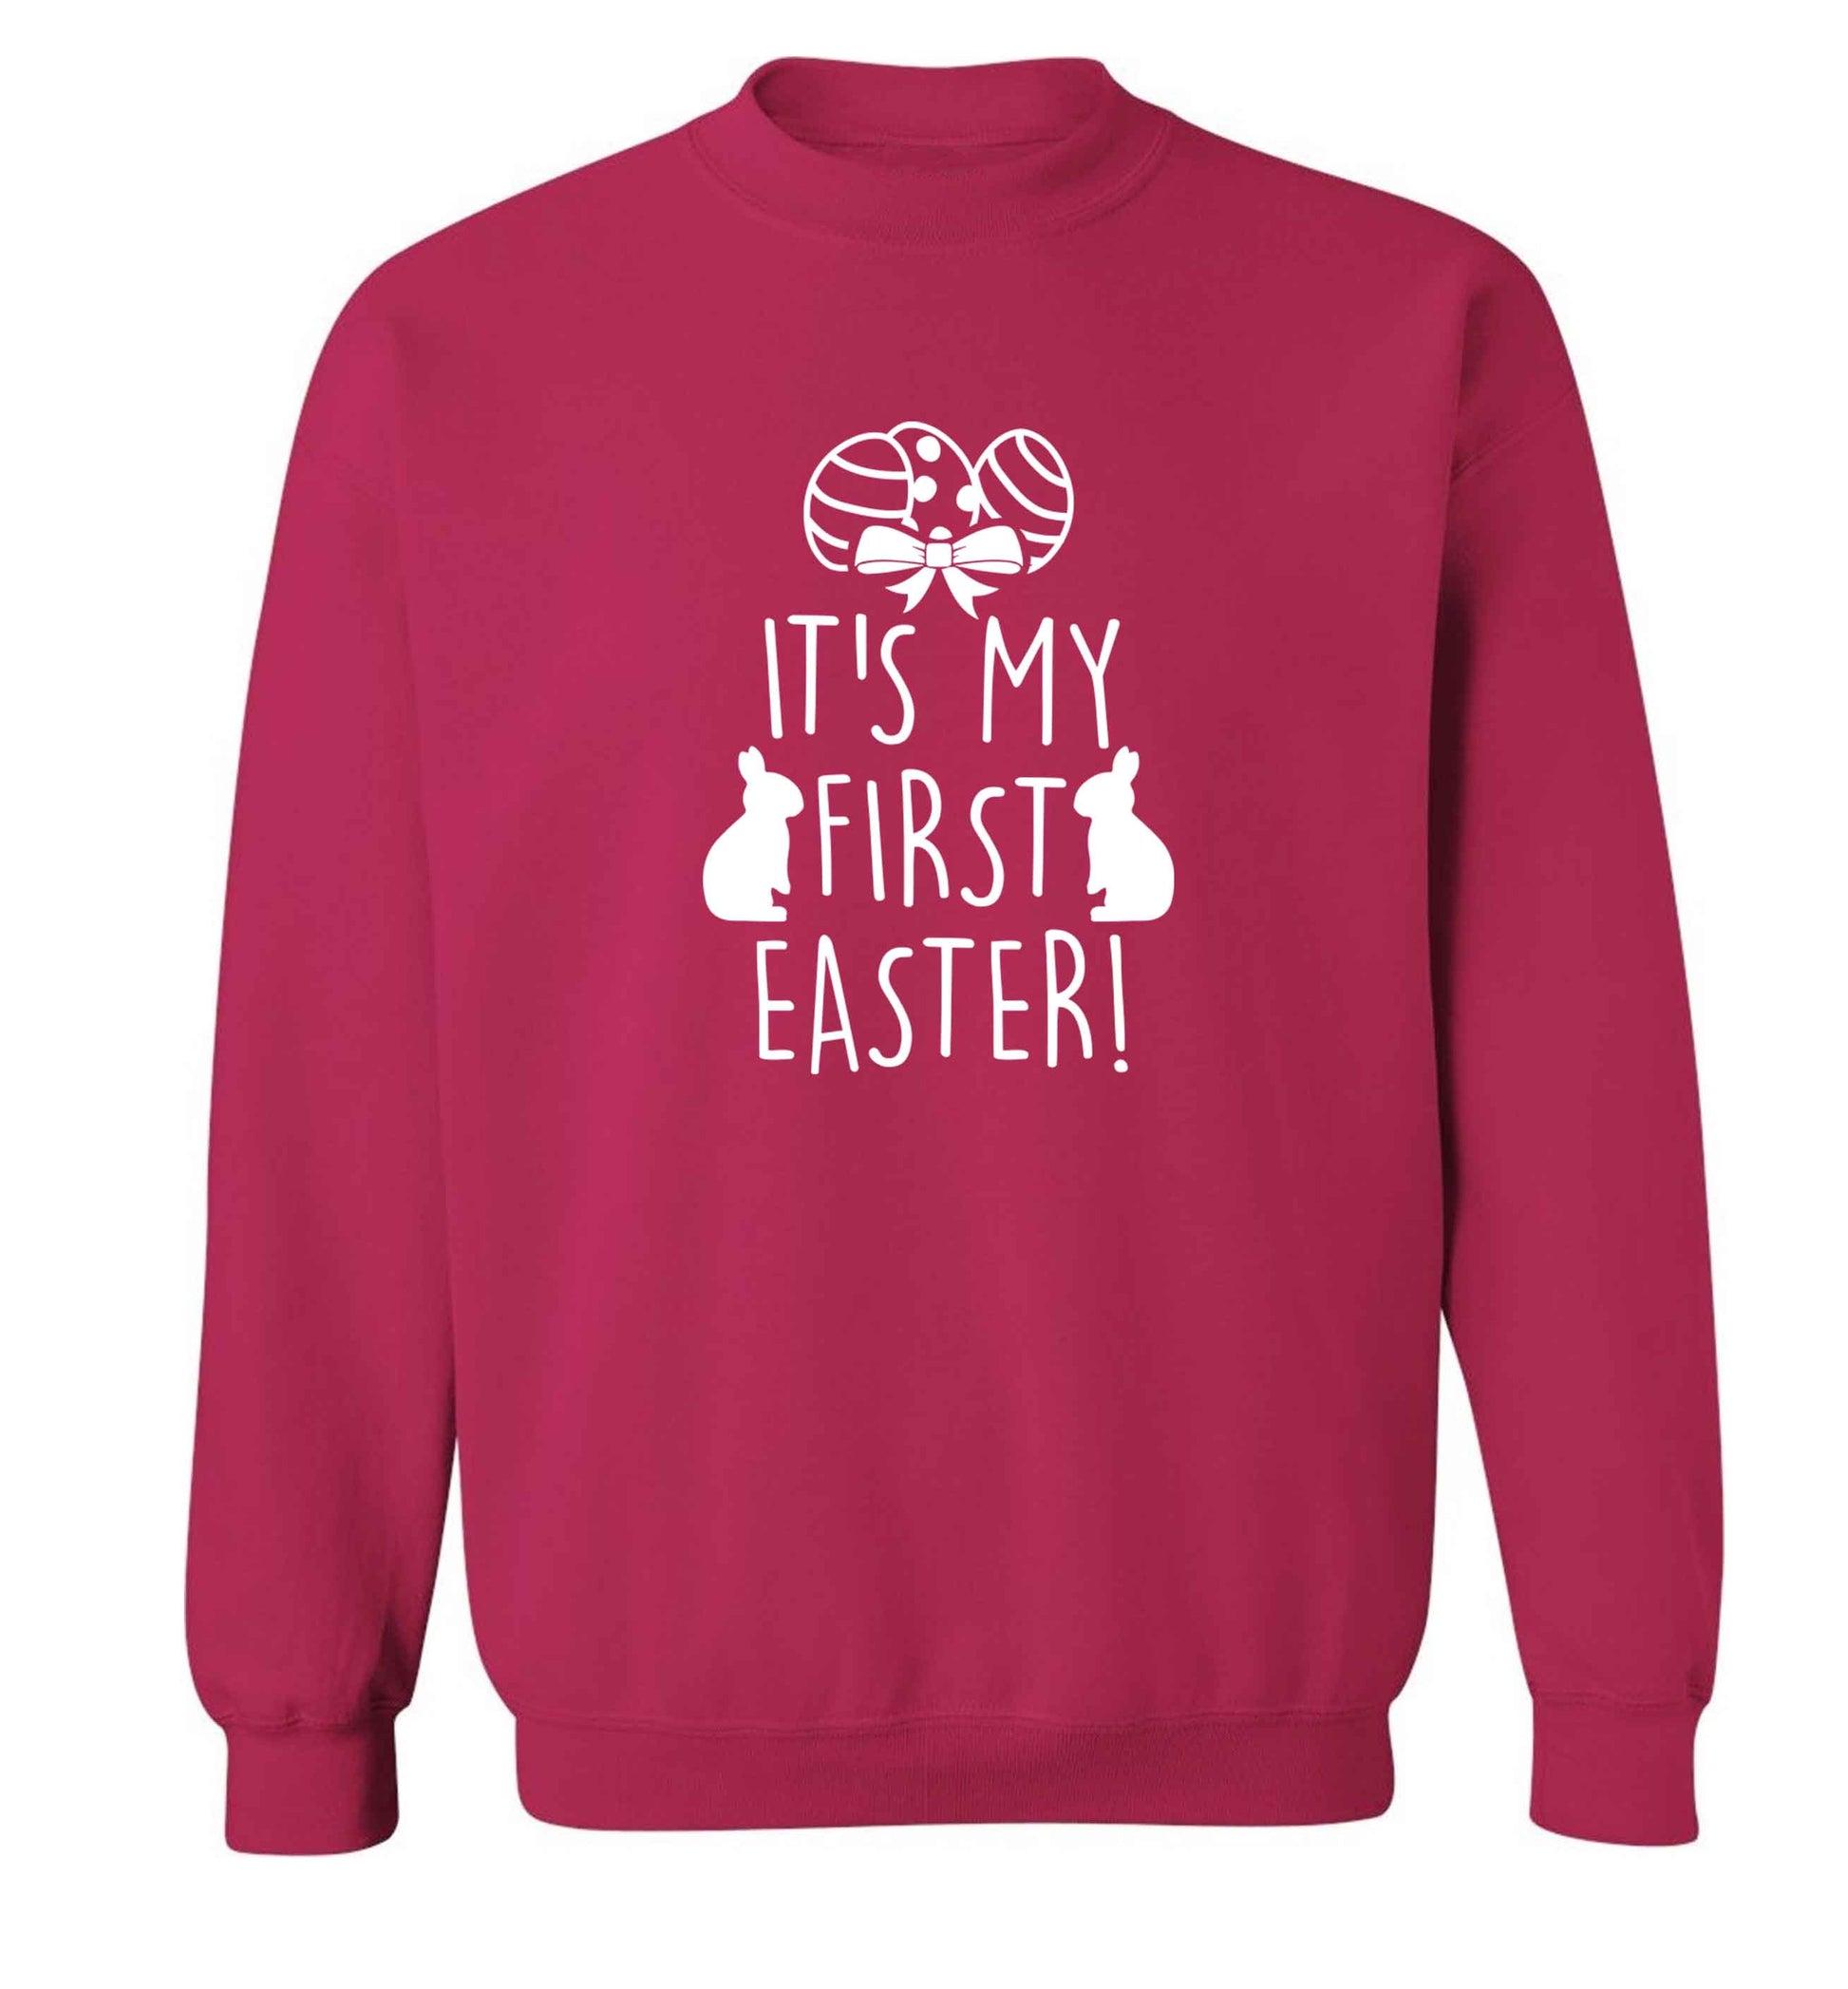 It's my first Easter adult's unisex pink sweater 2XL